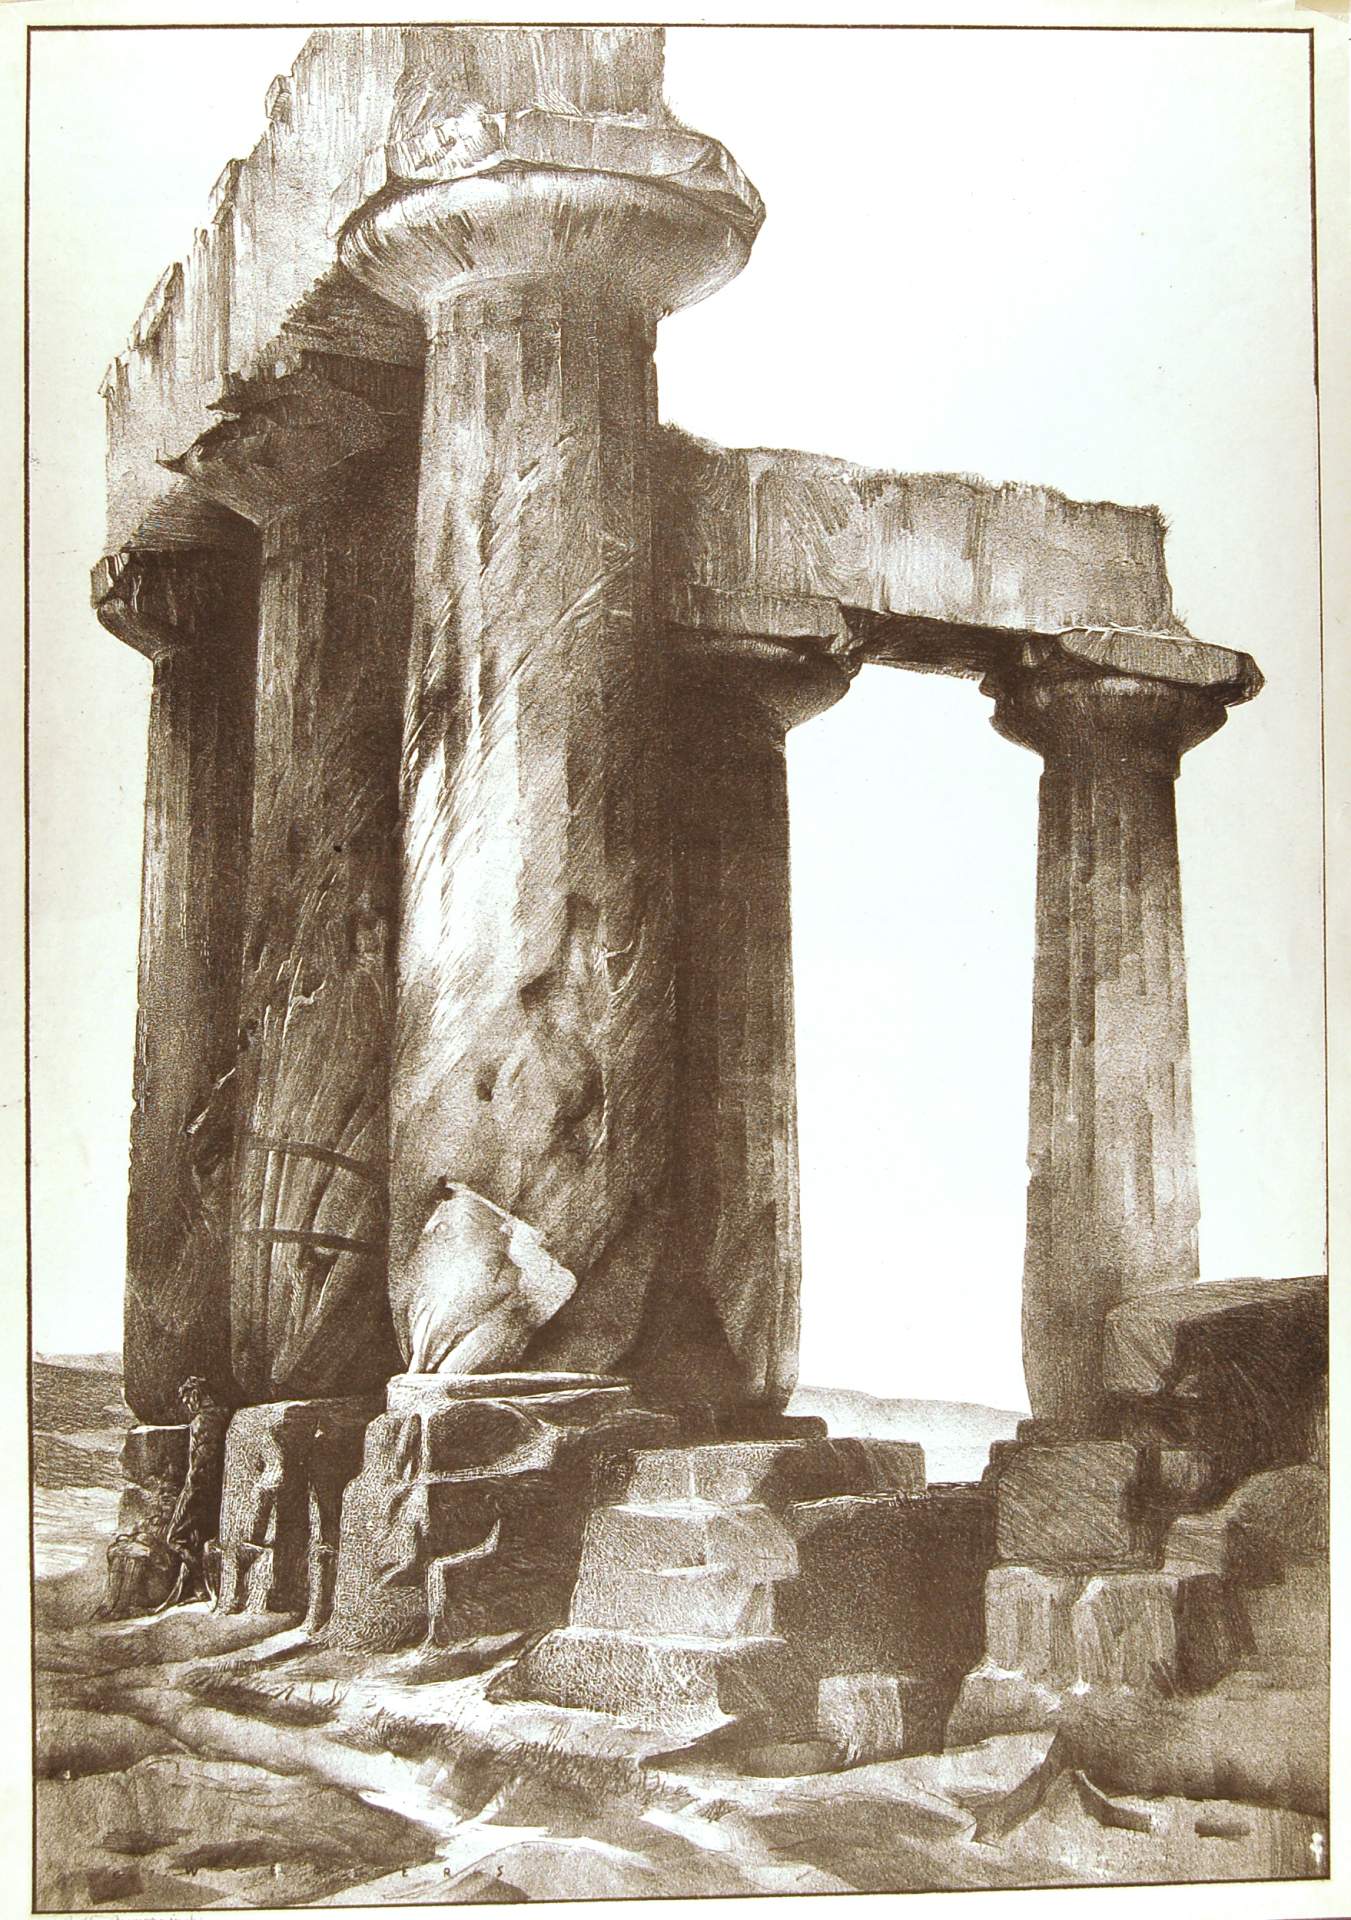 Untitled (Study of Temple Ruin)